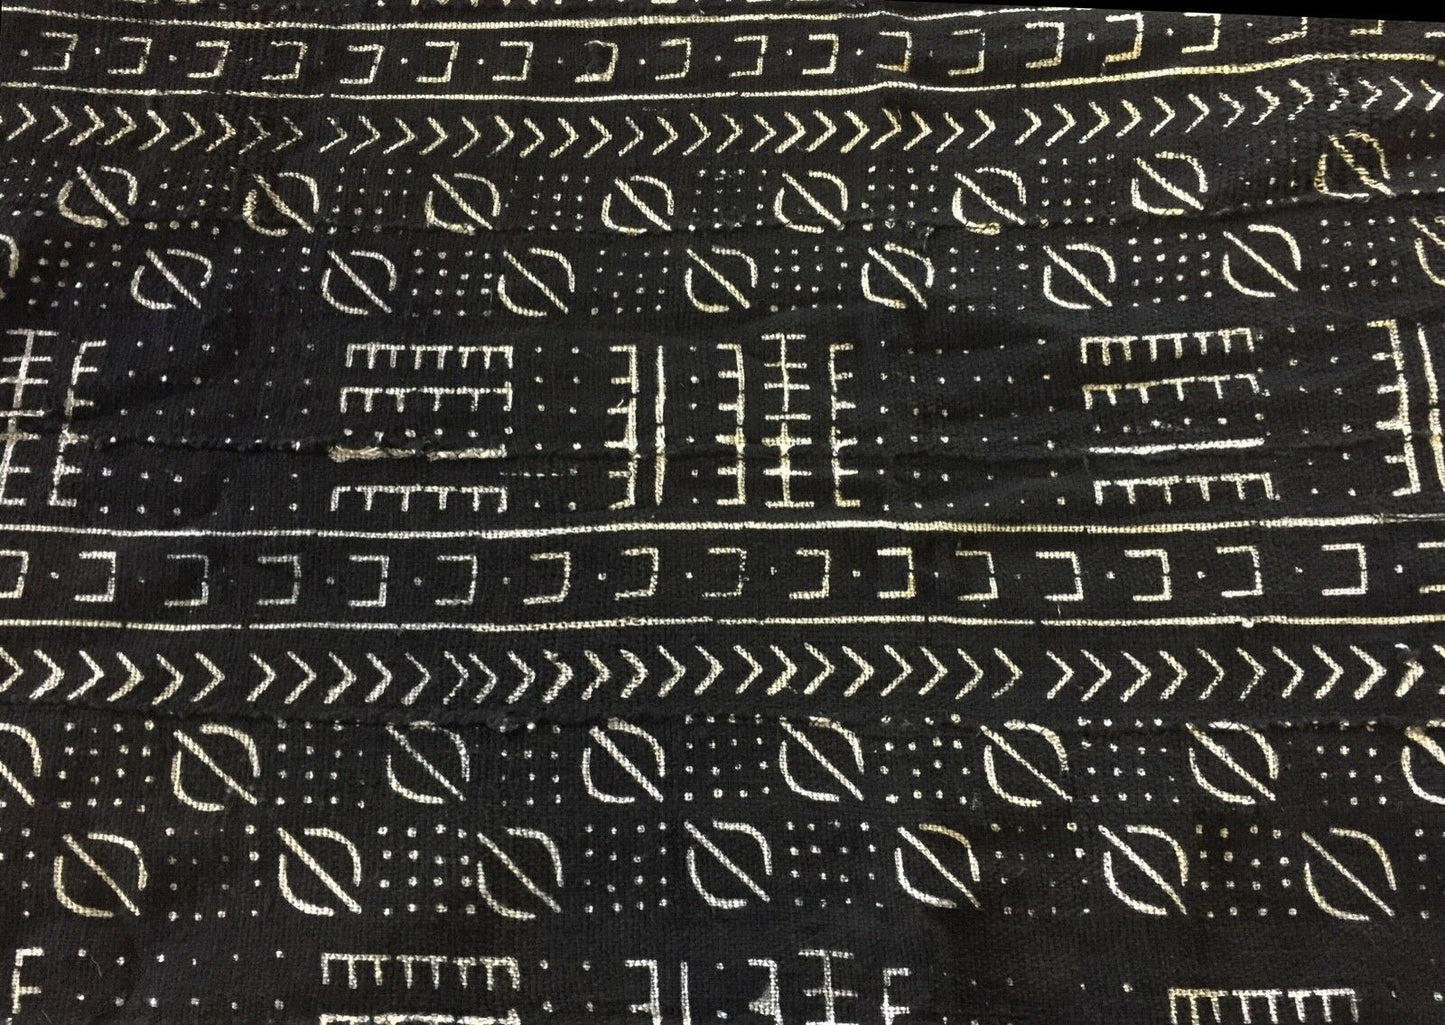 African Mali Black and White Mud Cloth Textile / PAIR 61" by 46" Pair # 1838